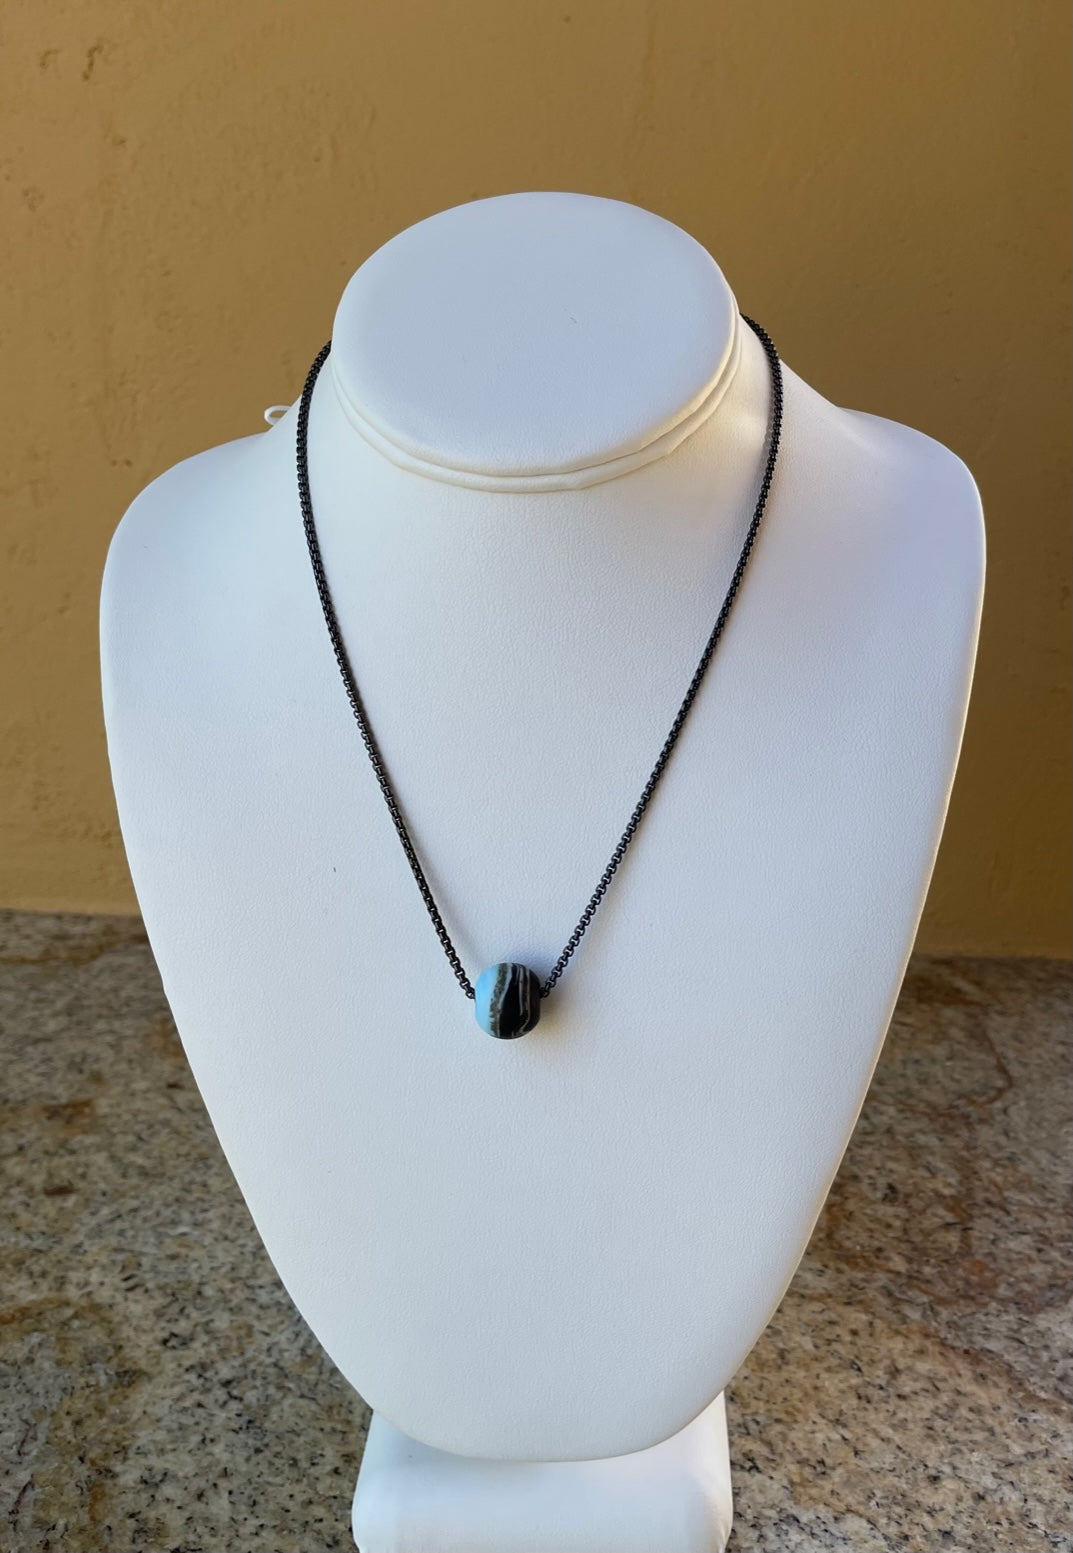 Necklace - Black chain with handmade clay bead